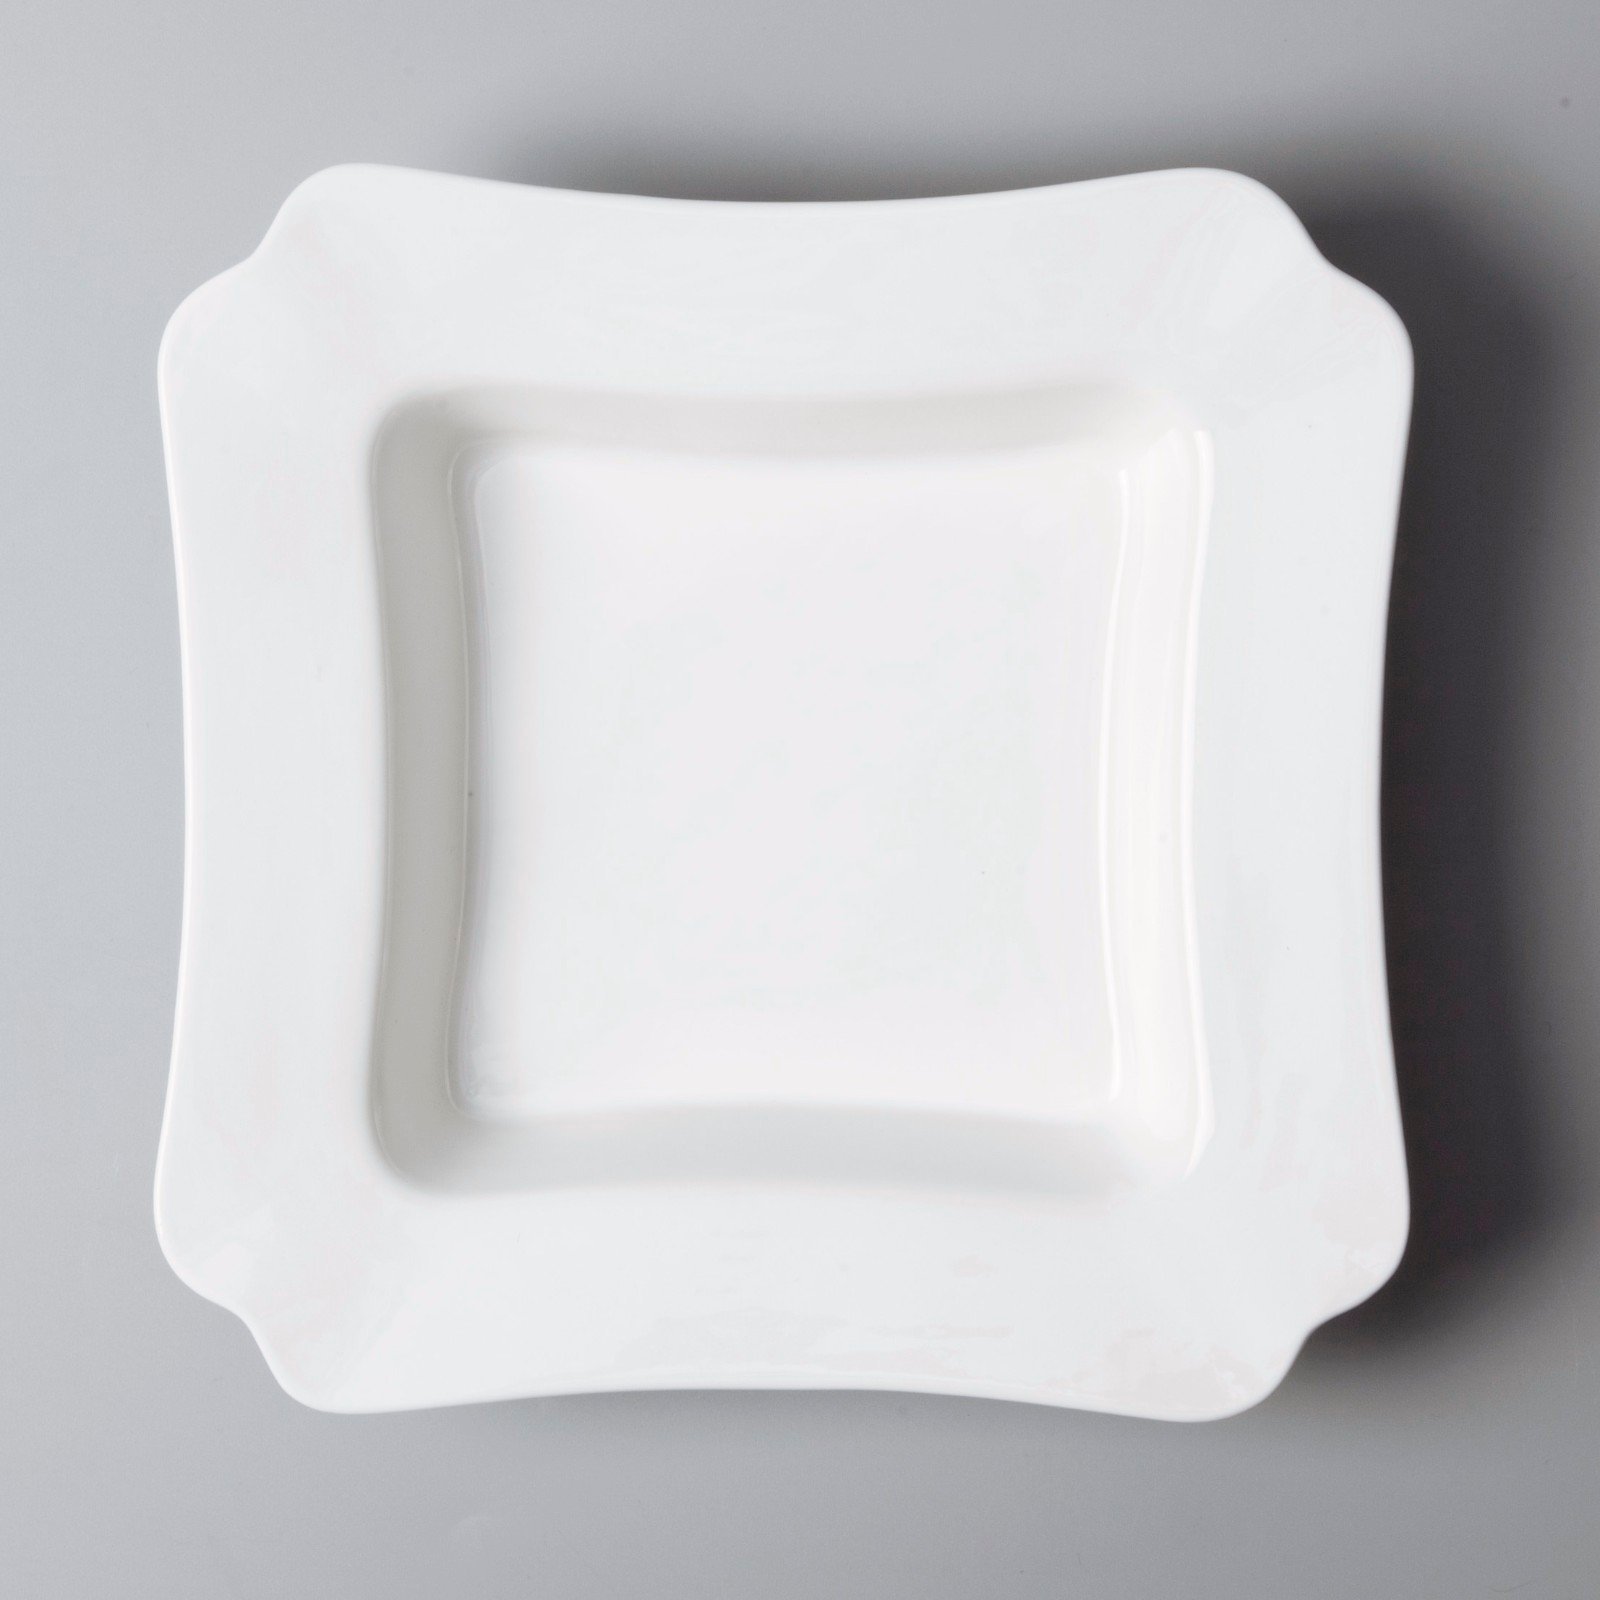 white porcelain tableware smooth two eight ceramics Two Eight Brand